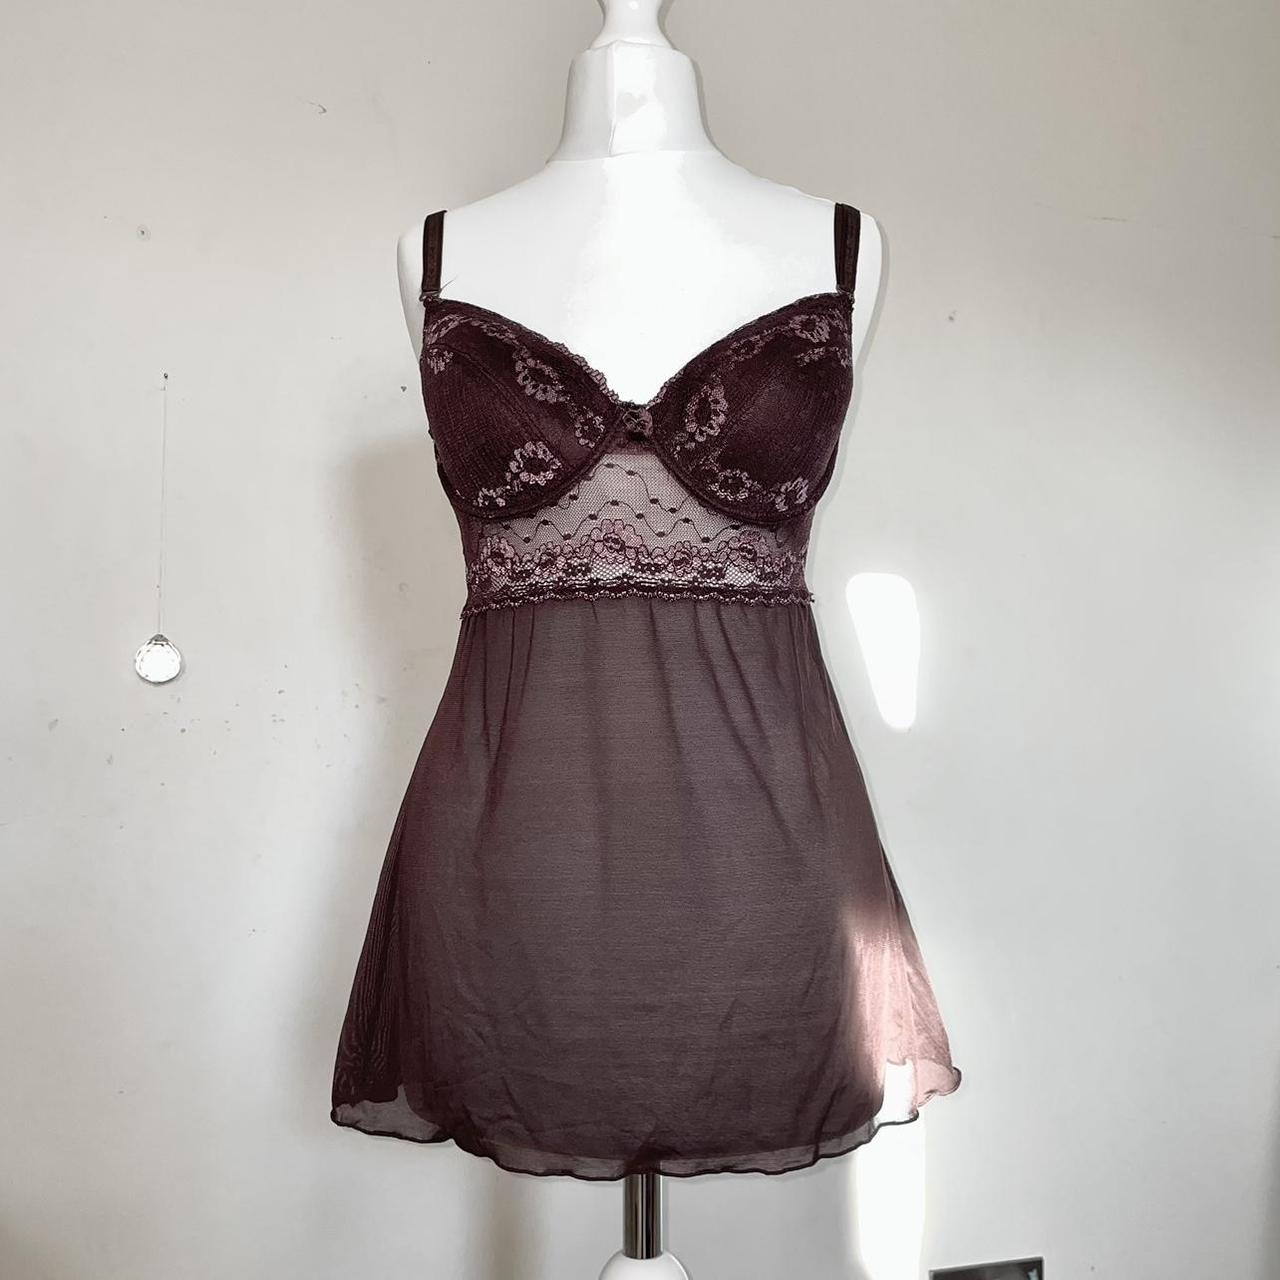 Maroon bustier top/ lingerie. Labeled 75C which I... - Depop